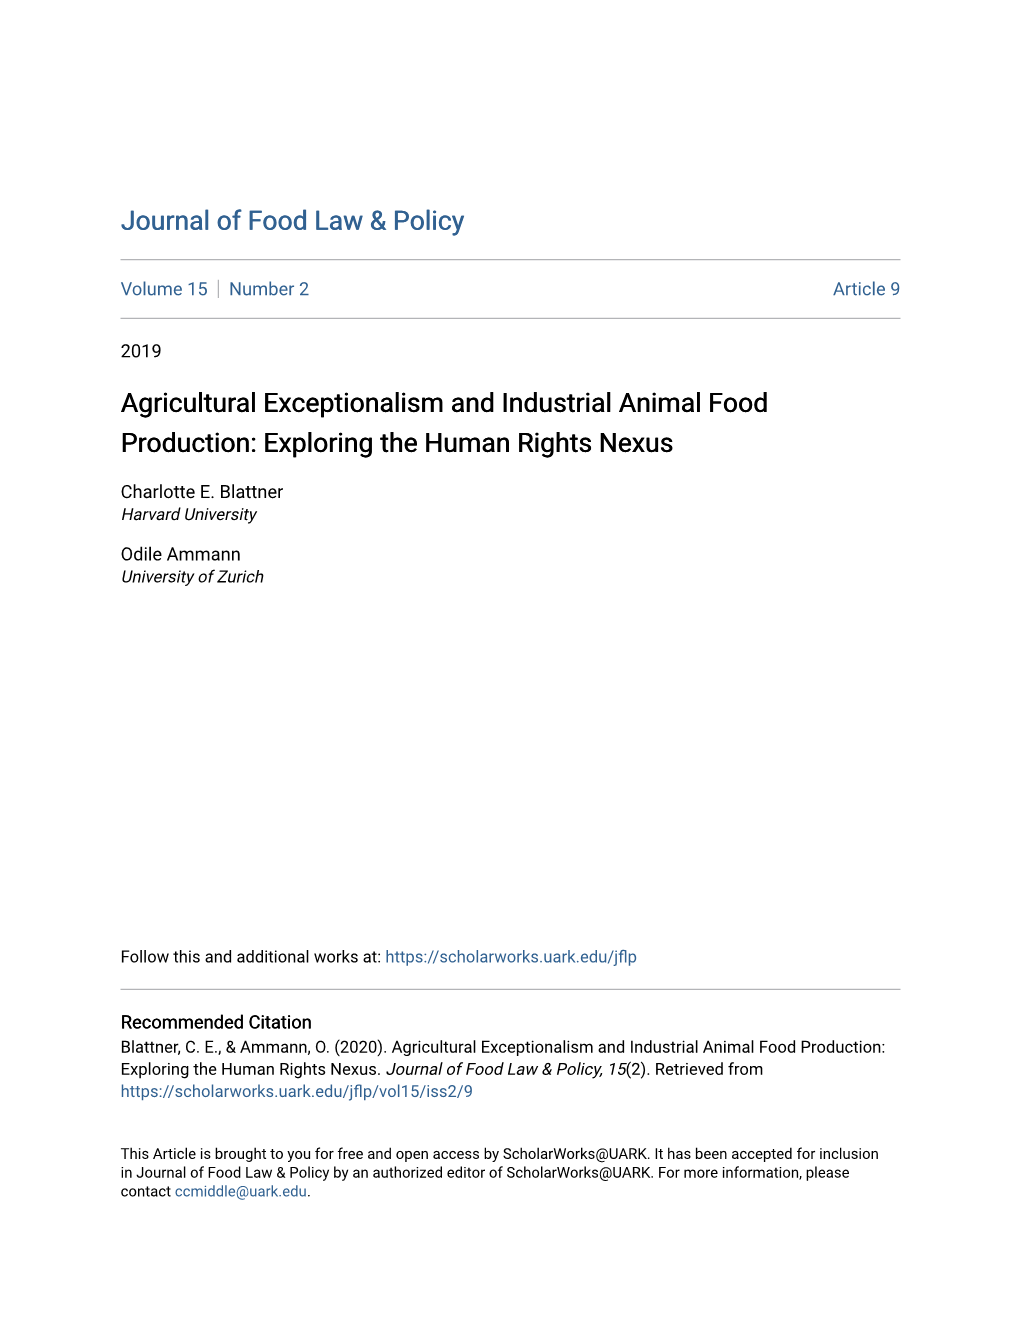 Agricultural Exceptionalism and Industrial Animal Food Production: Exploring the Human Rights Nexus